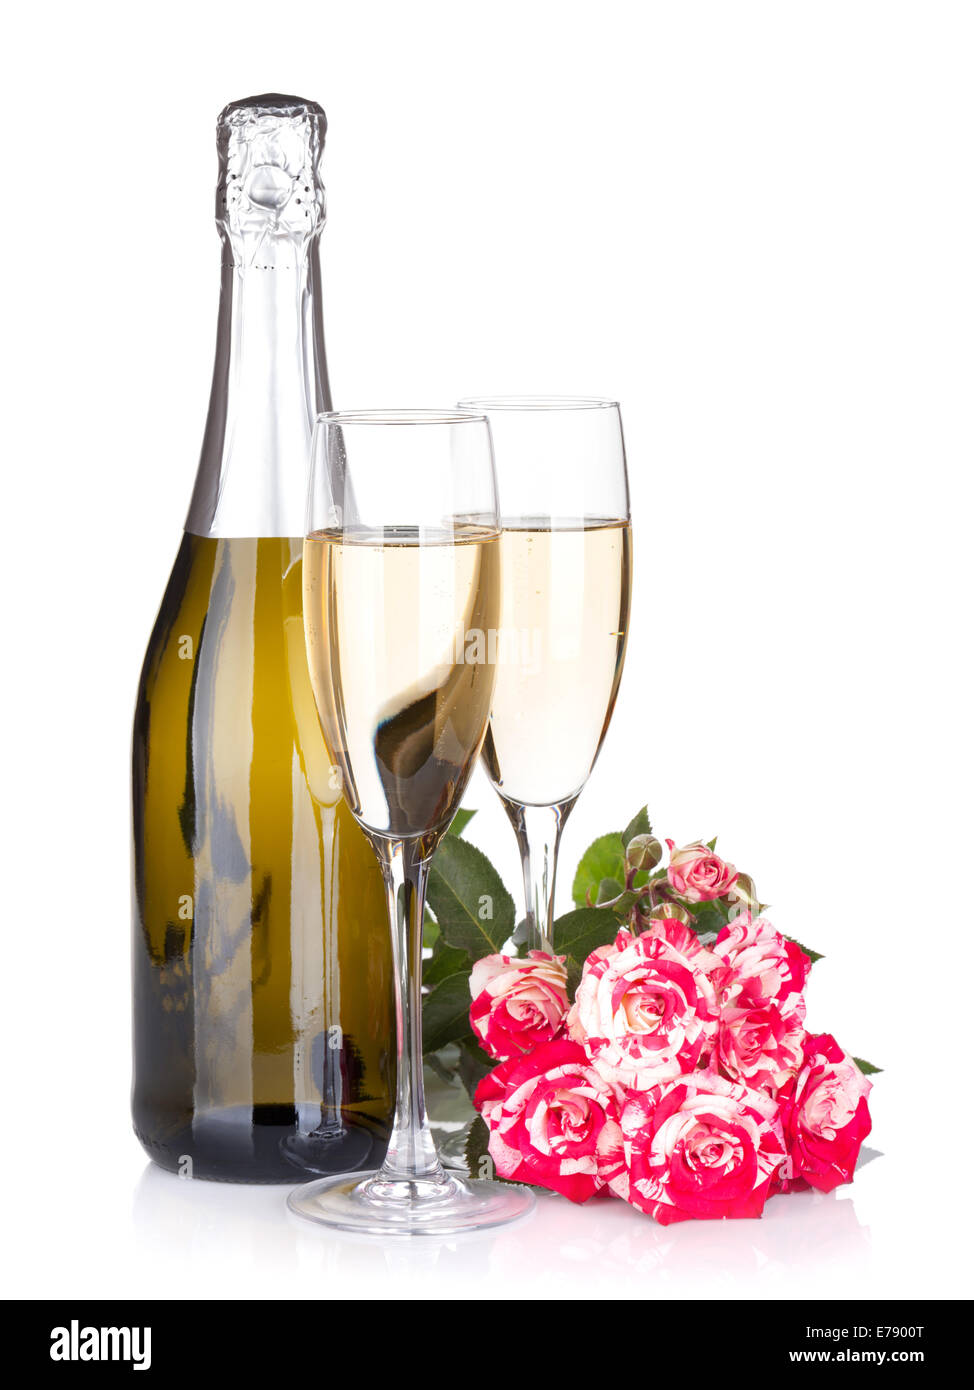 Champagne bottle, two glasses and red rose flowers. Isolated on white background Stock Photo